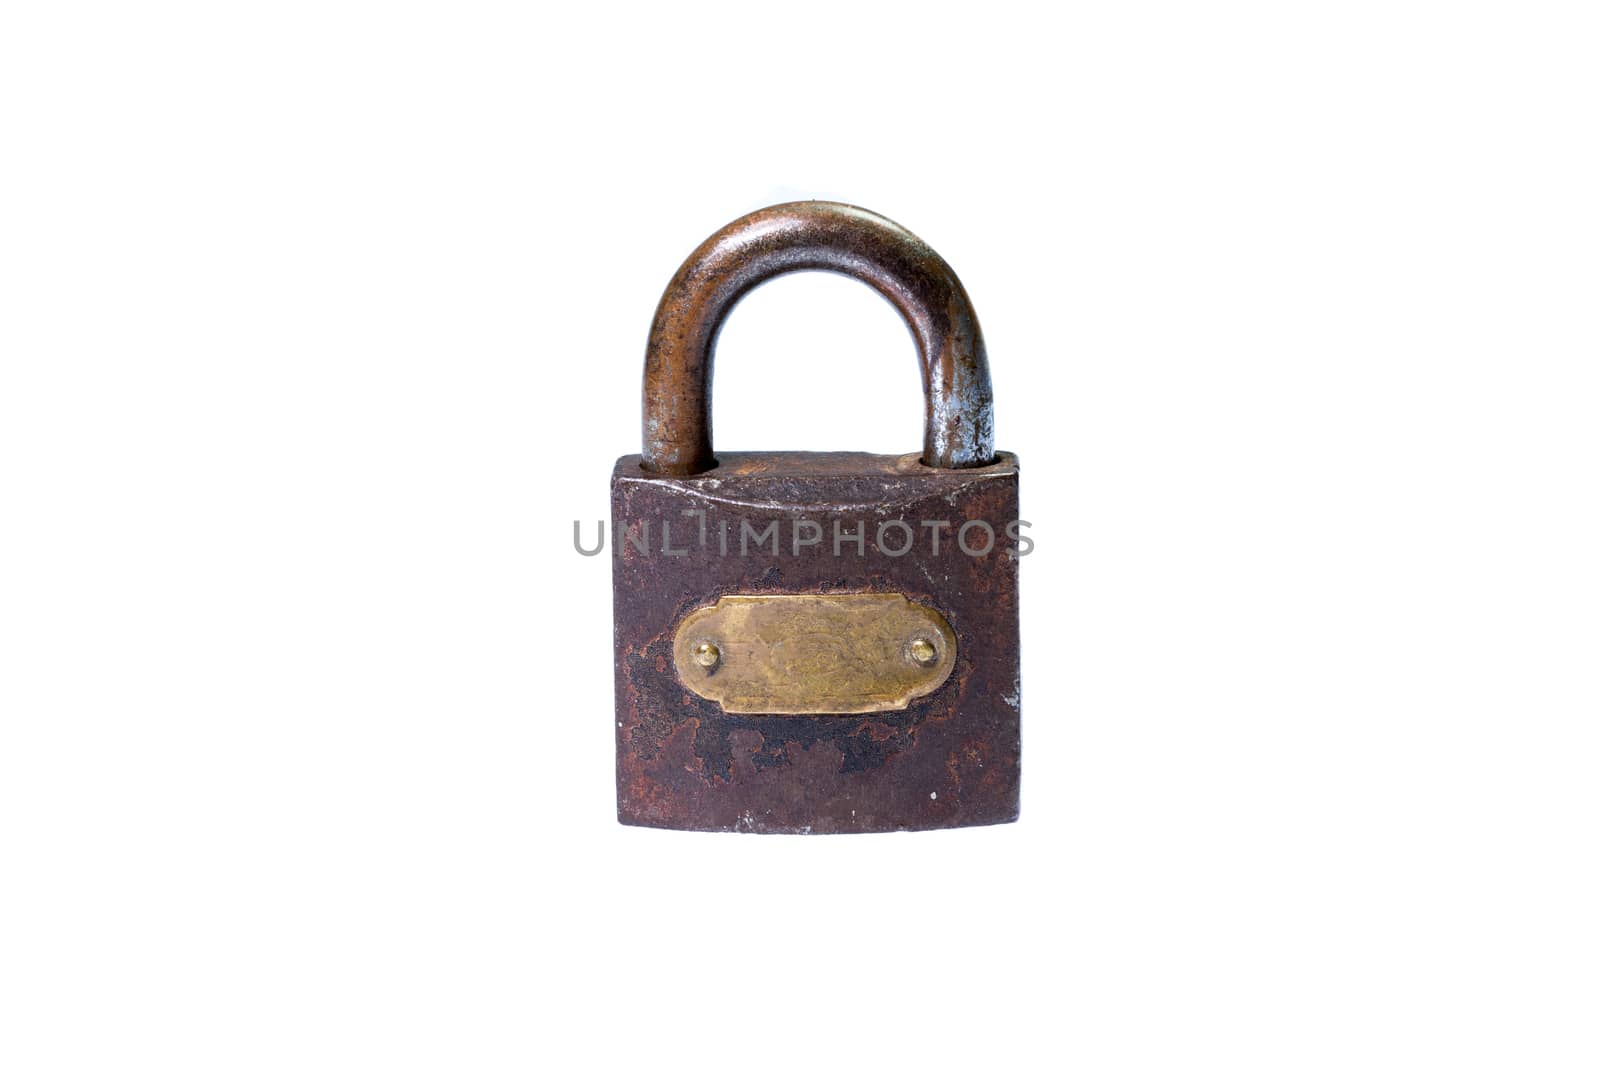 Locked padlock close-up isolated on white with gold tag